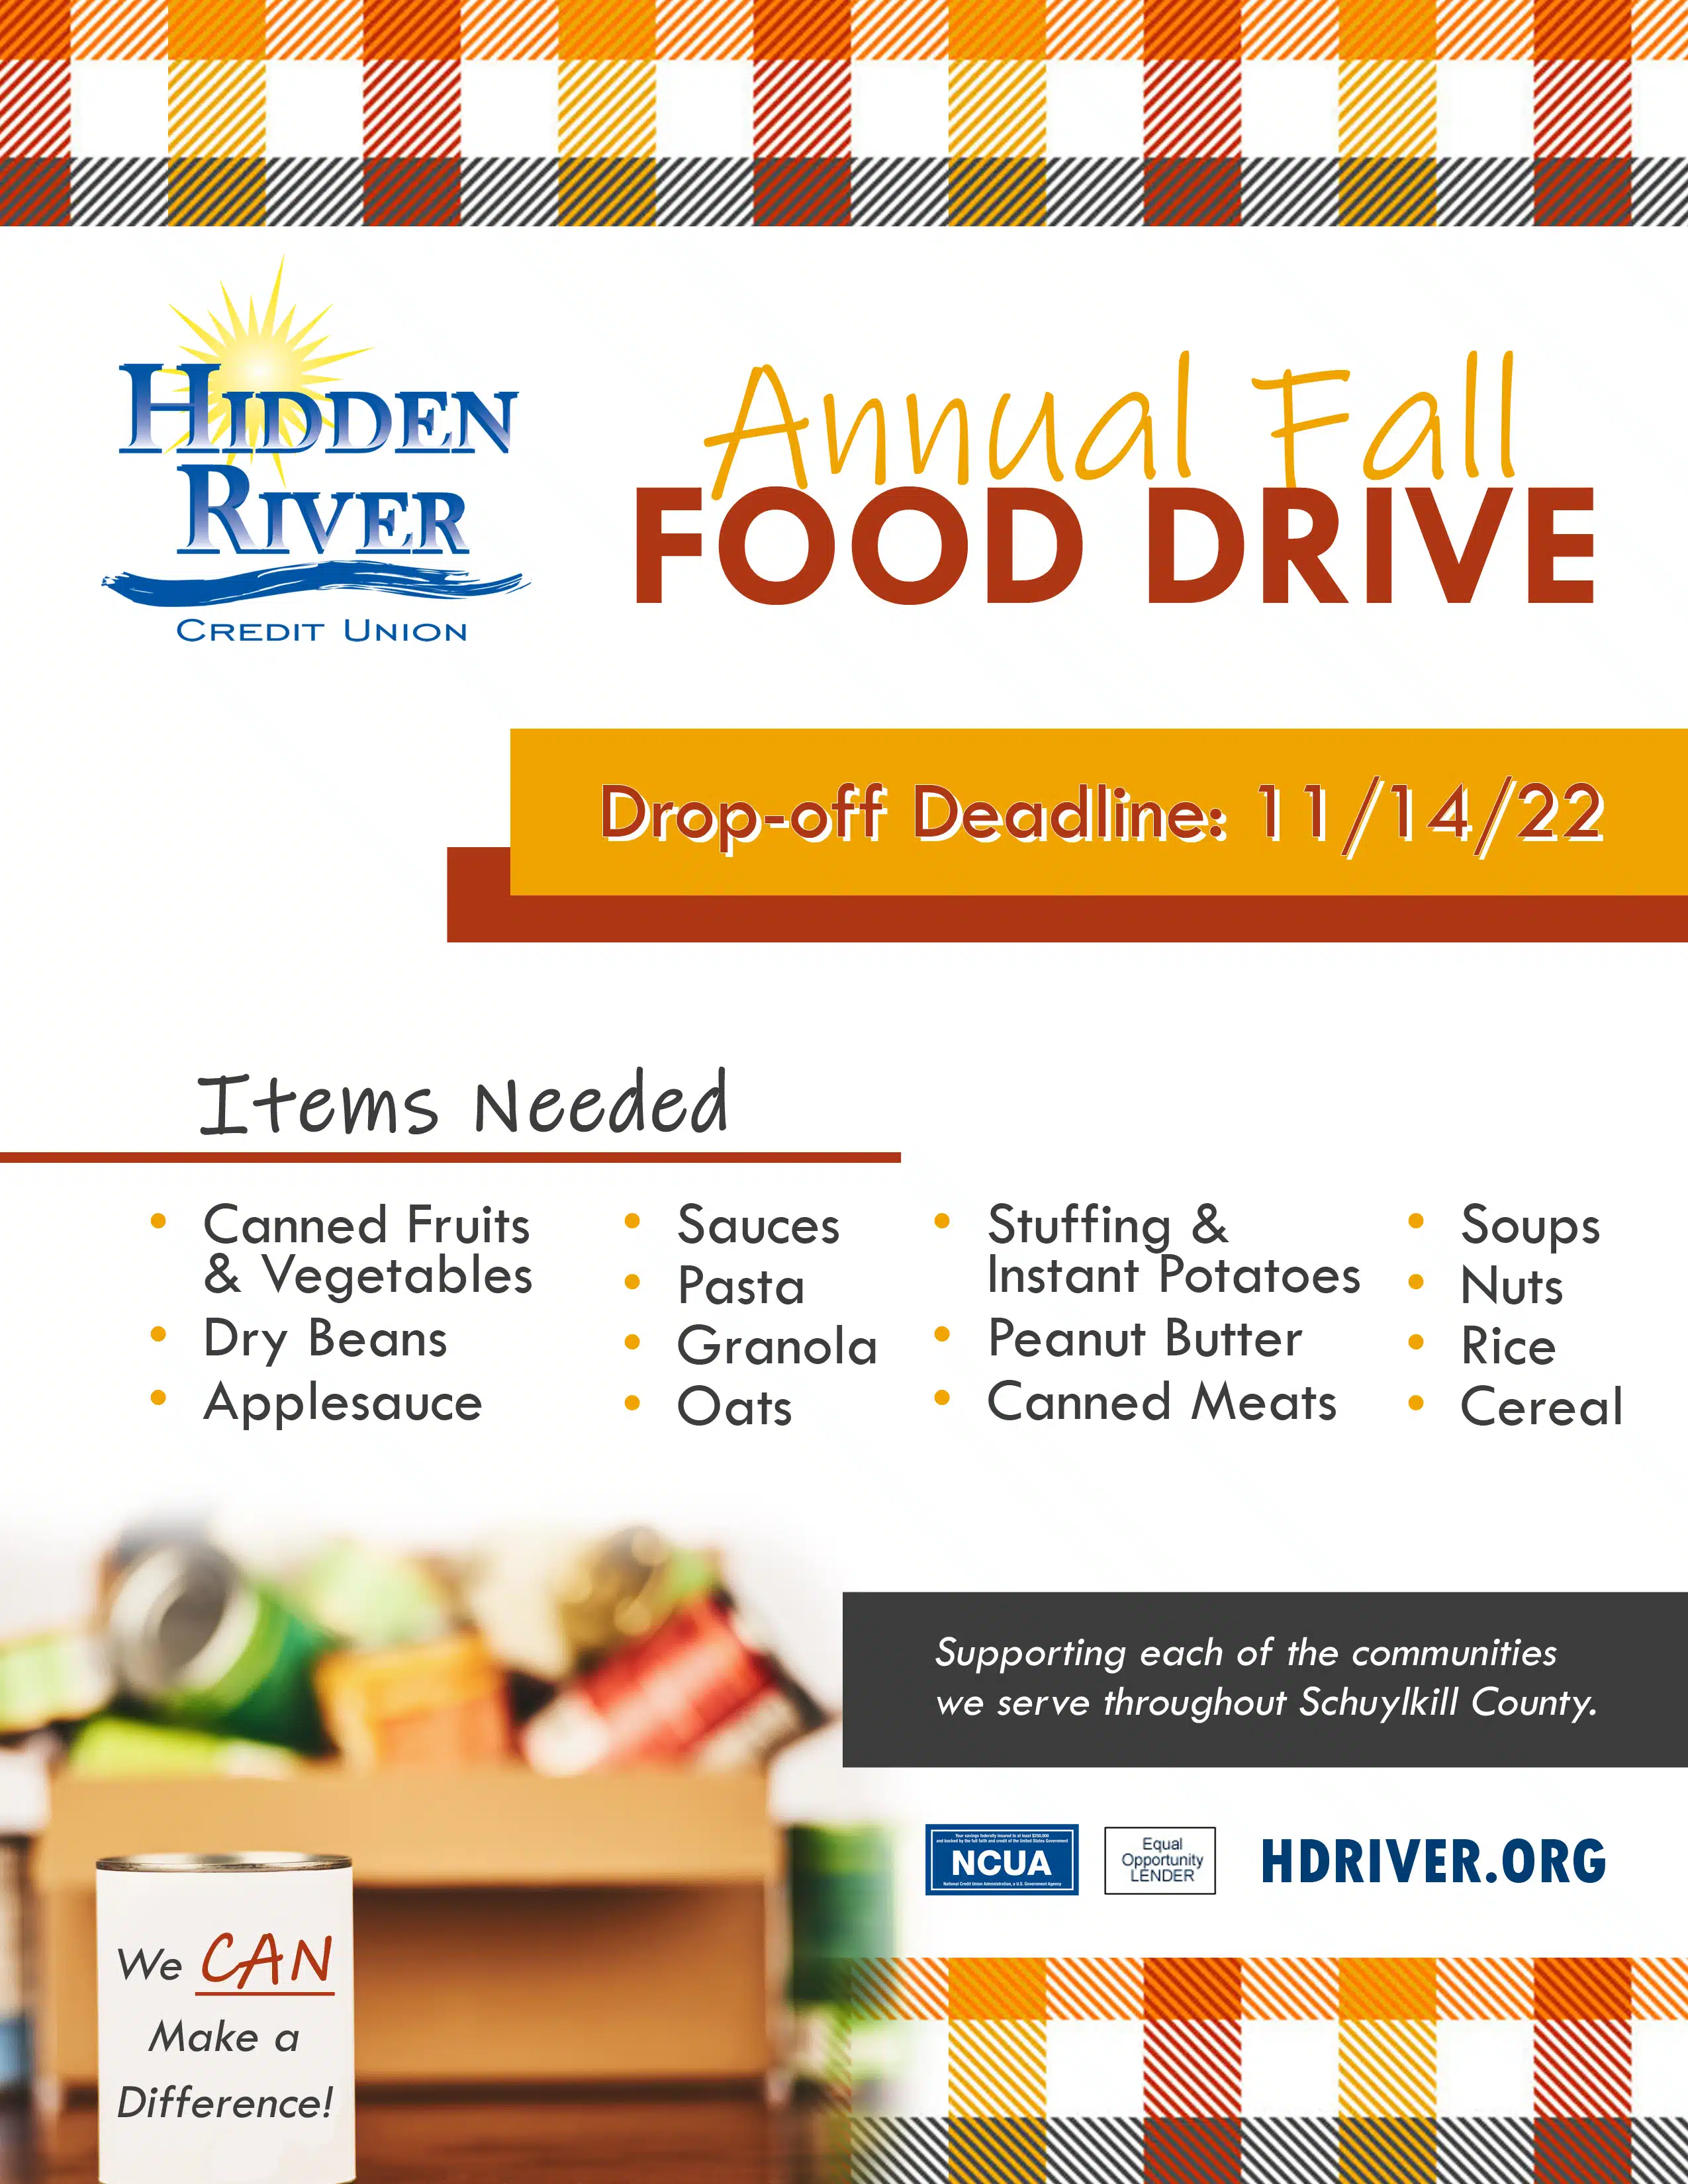 box of food donation items with plaid border at top and bottom. Includes text "Annual Fall Food Drive" "Drop-off deadline: 11/14/22" "Items Needed List"